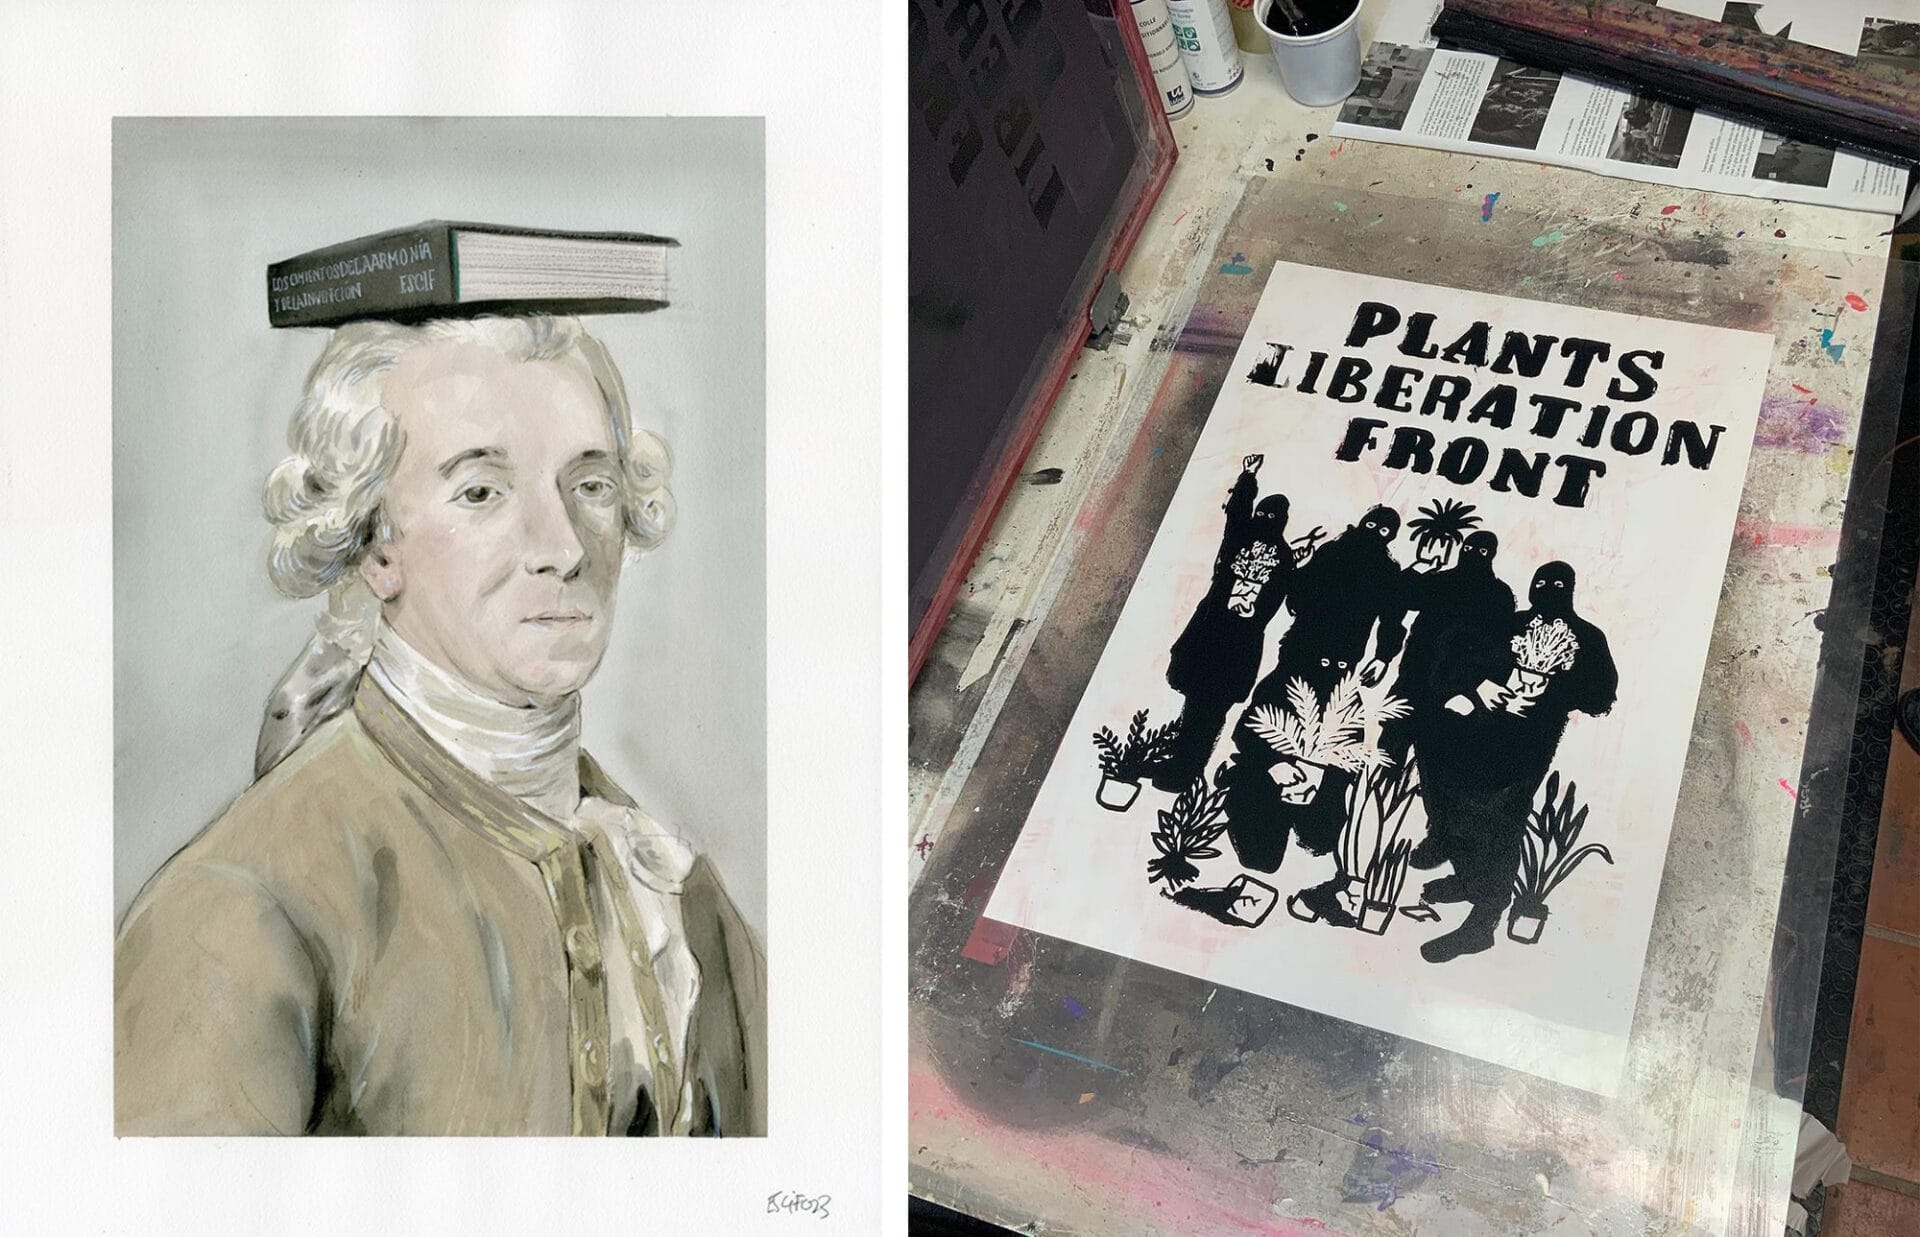 a side-by-side image showing, on the left, a watercolor portrait of an 18th-century man balancing a book on his head, and on the right, a print in a studio with the words "plant liberation front" and figures wearing balaclavas, holding plants